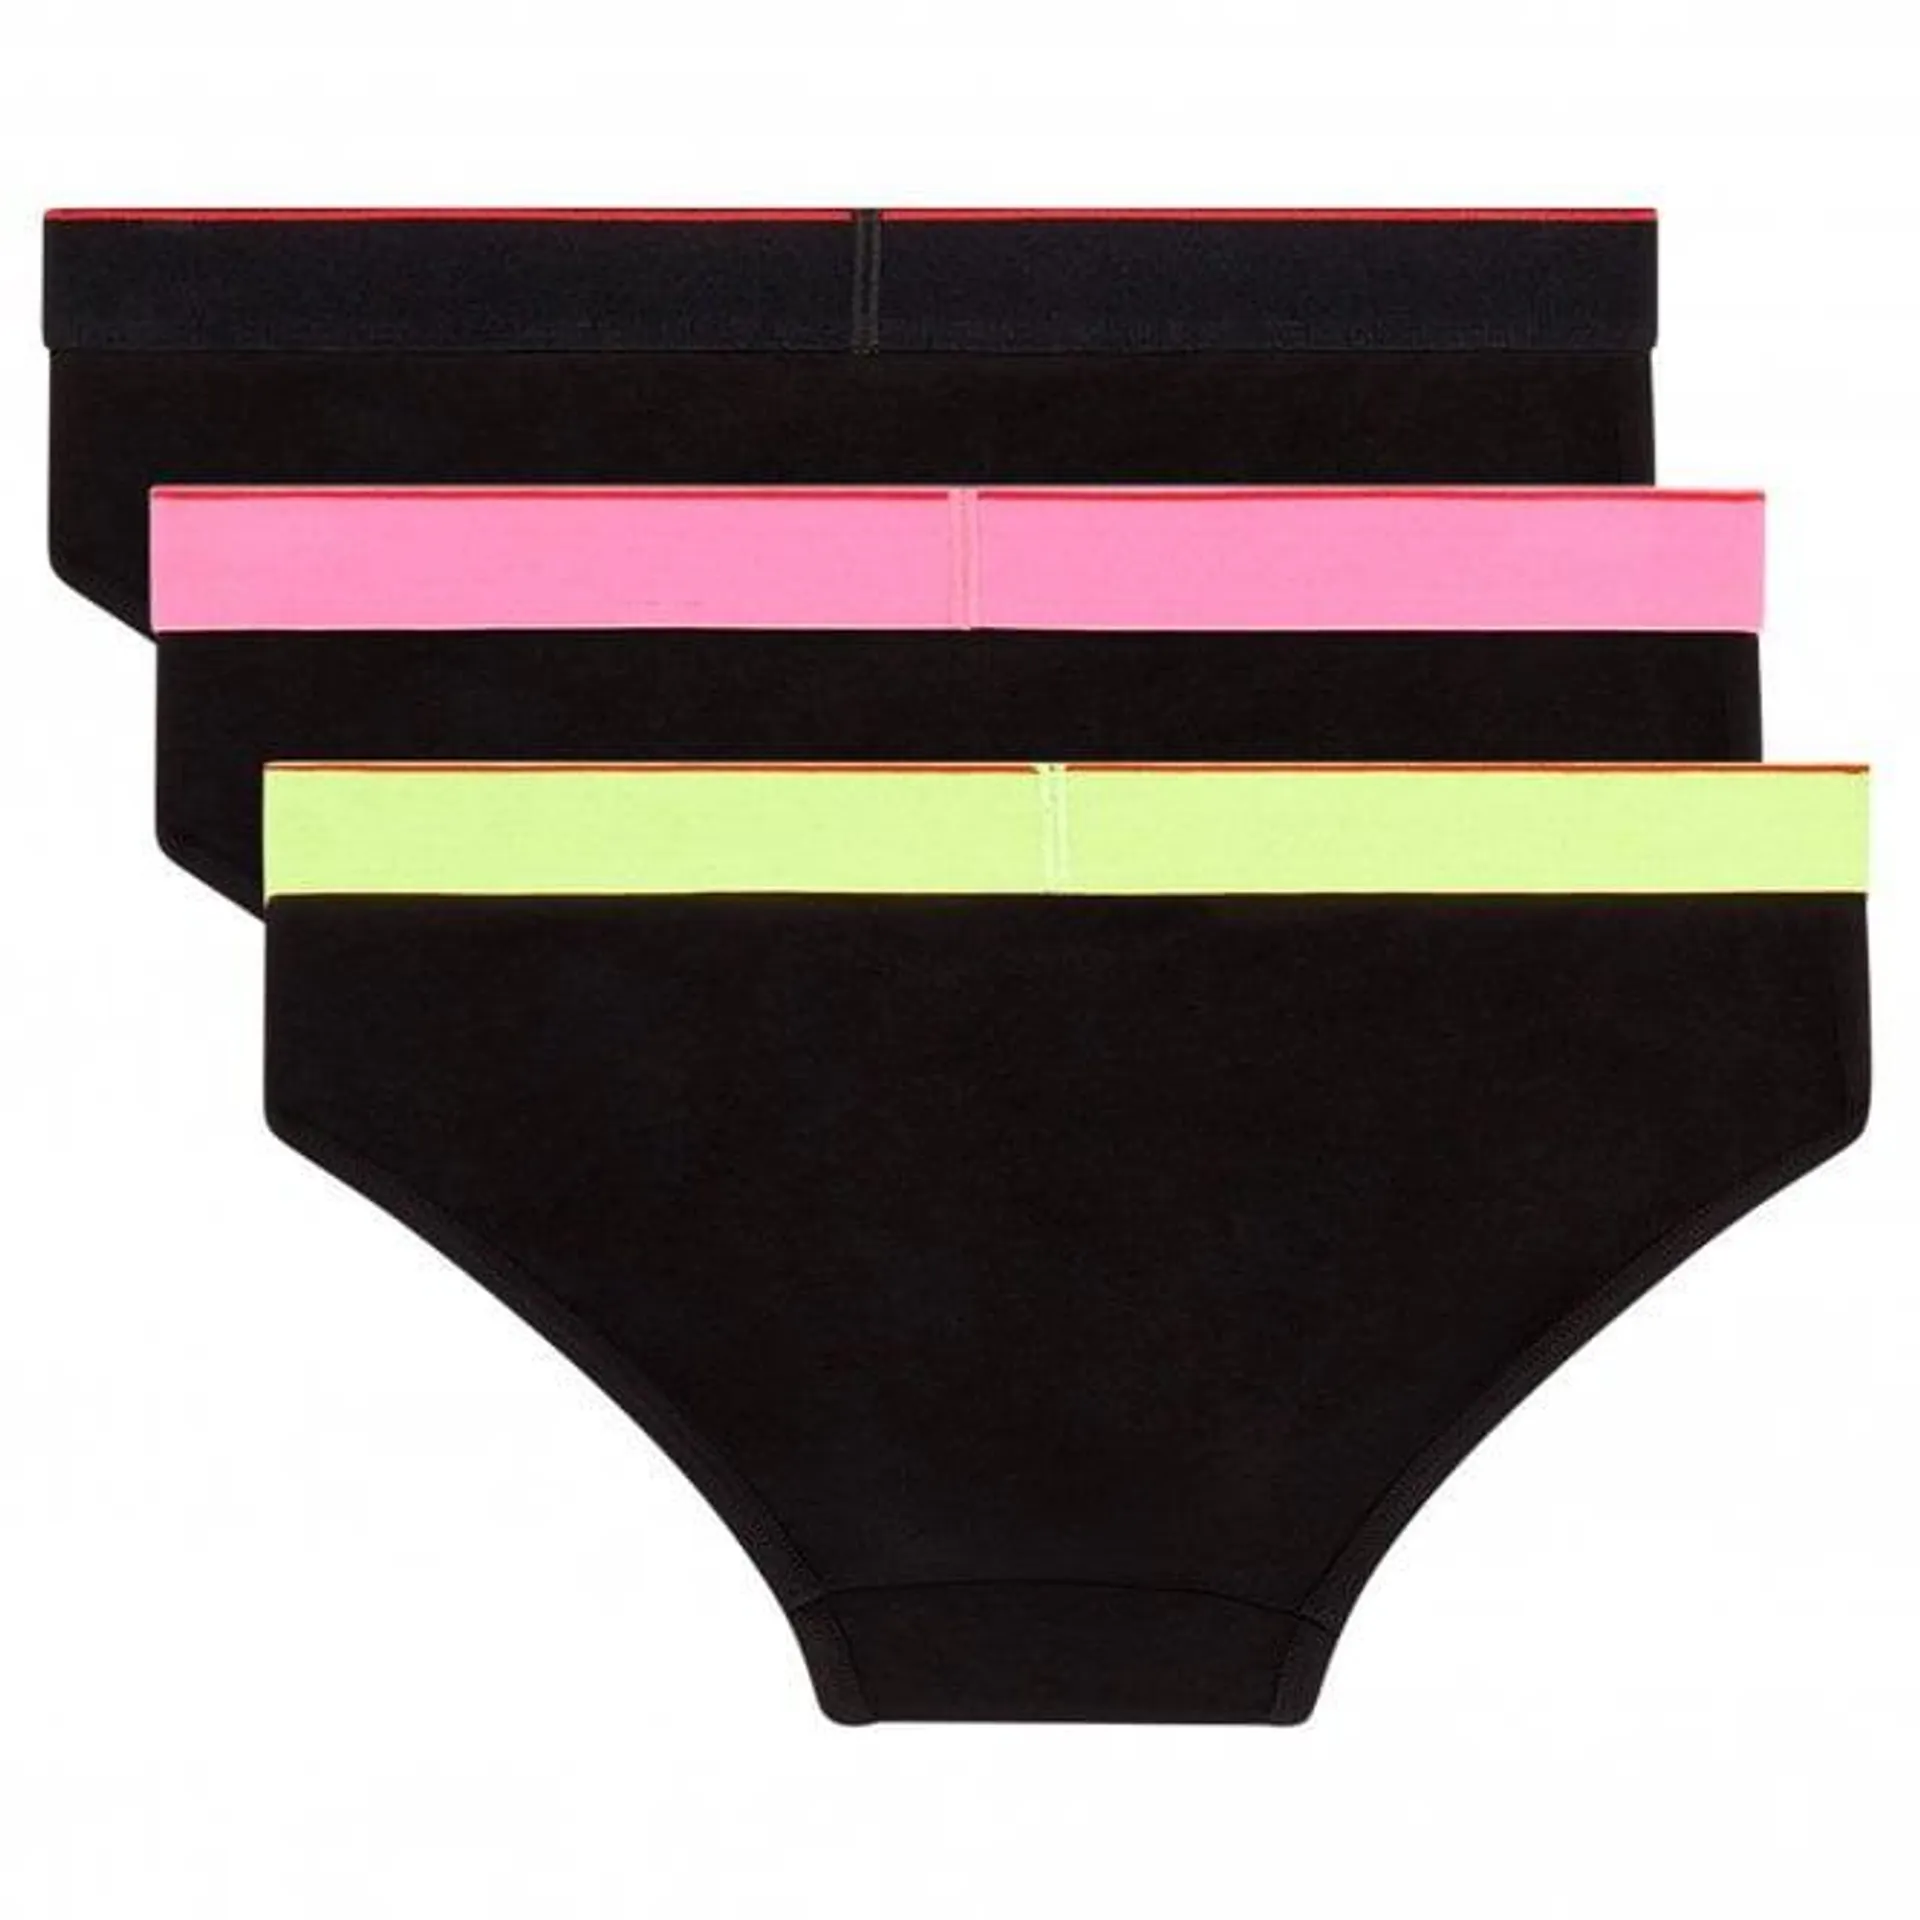 3-Pack Denim Division Briefs, Black with pink/yellow/black